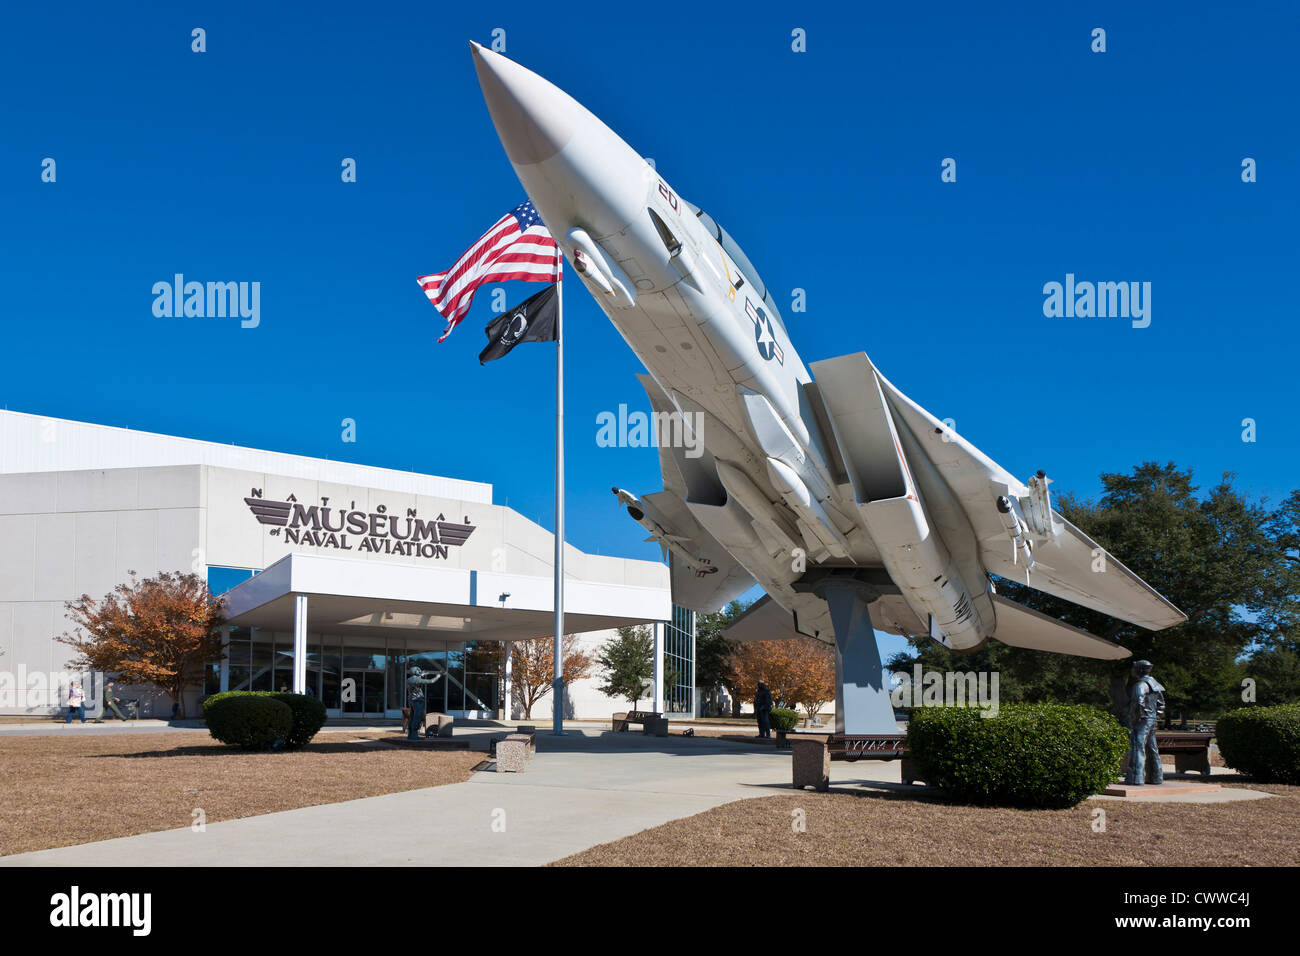 F-14A Tomcat fighter jet in front of the National Museum of Naval Aviation in Pensacola, FL Stock Photo